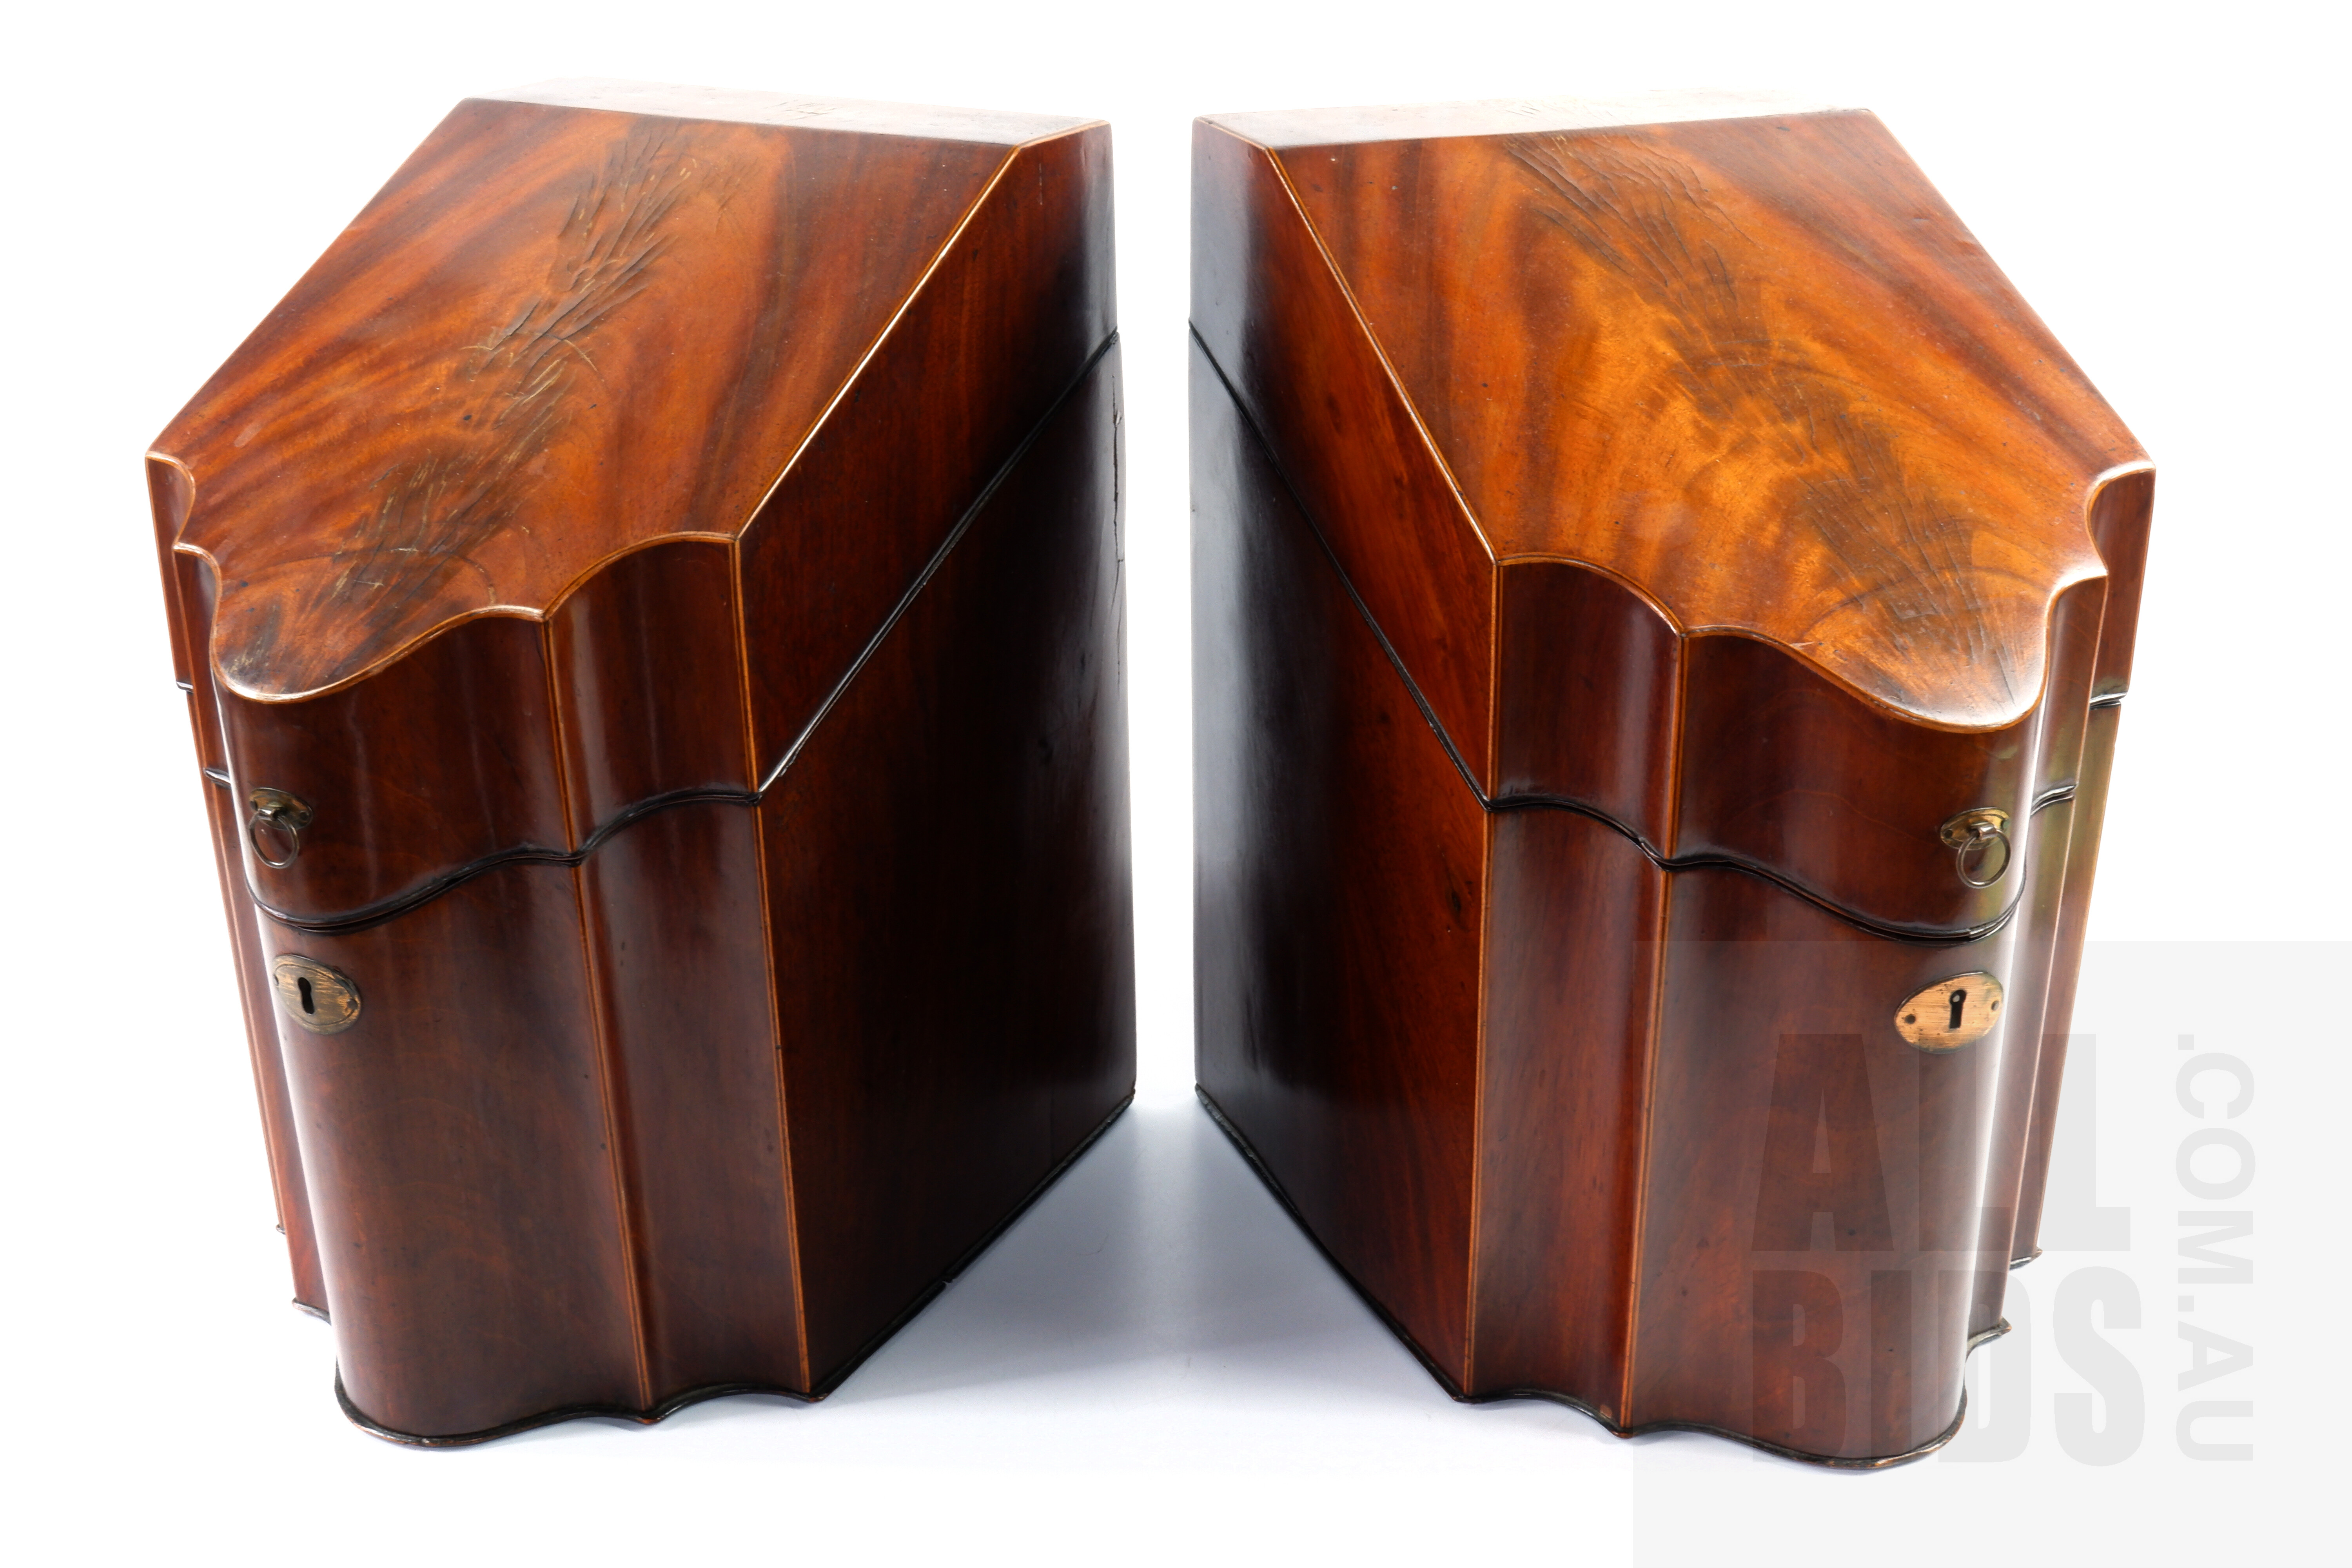 'Good Pair of Georgian Mahogany Knife Boxes with Original Inserts, Late 18th Century'